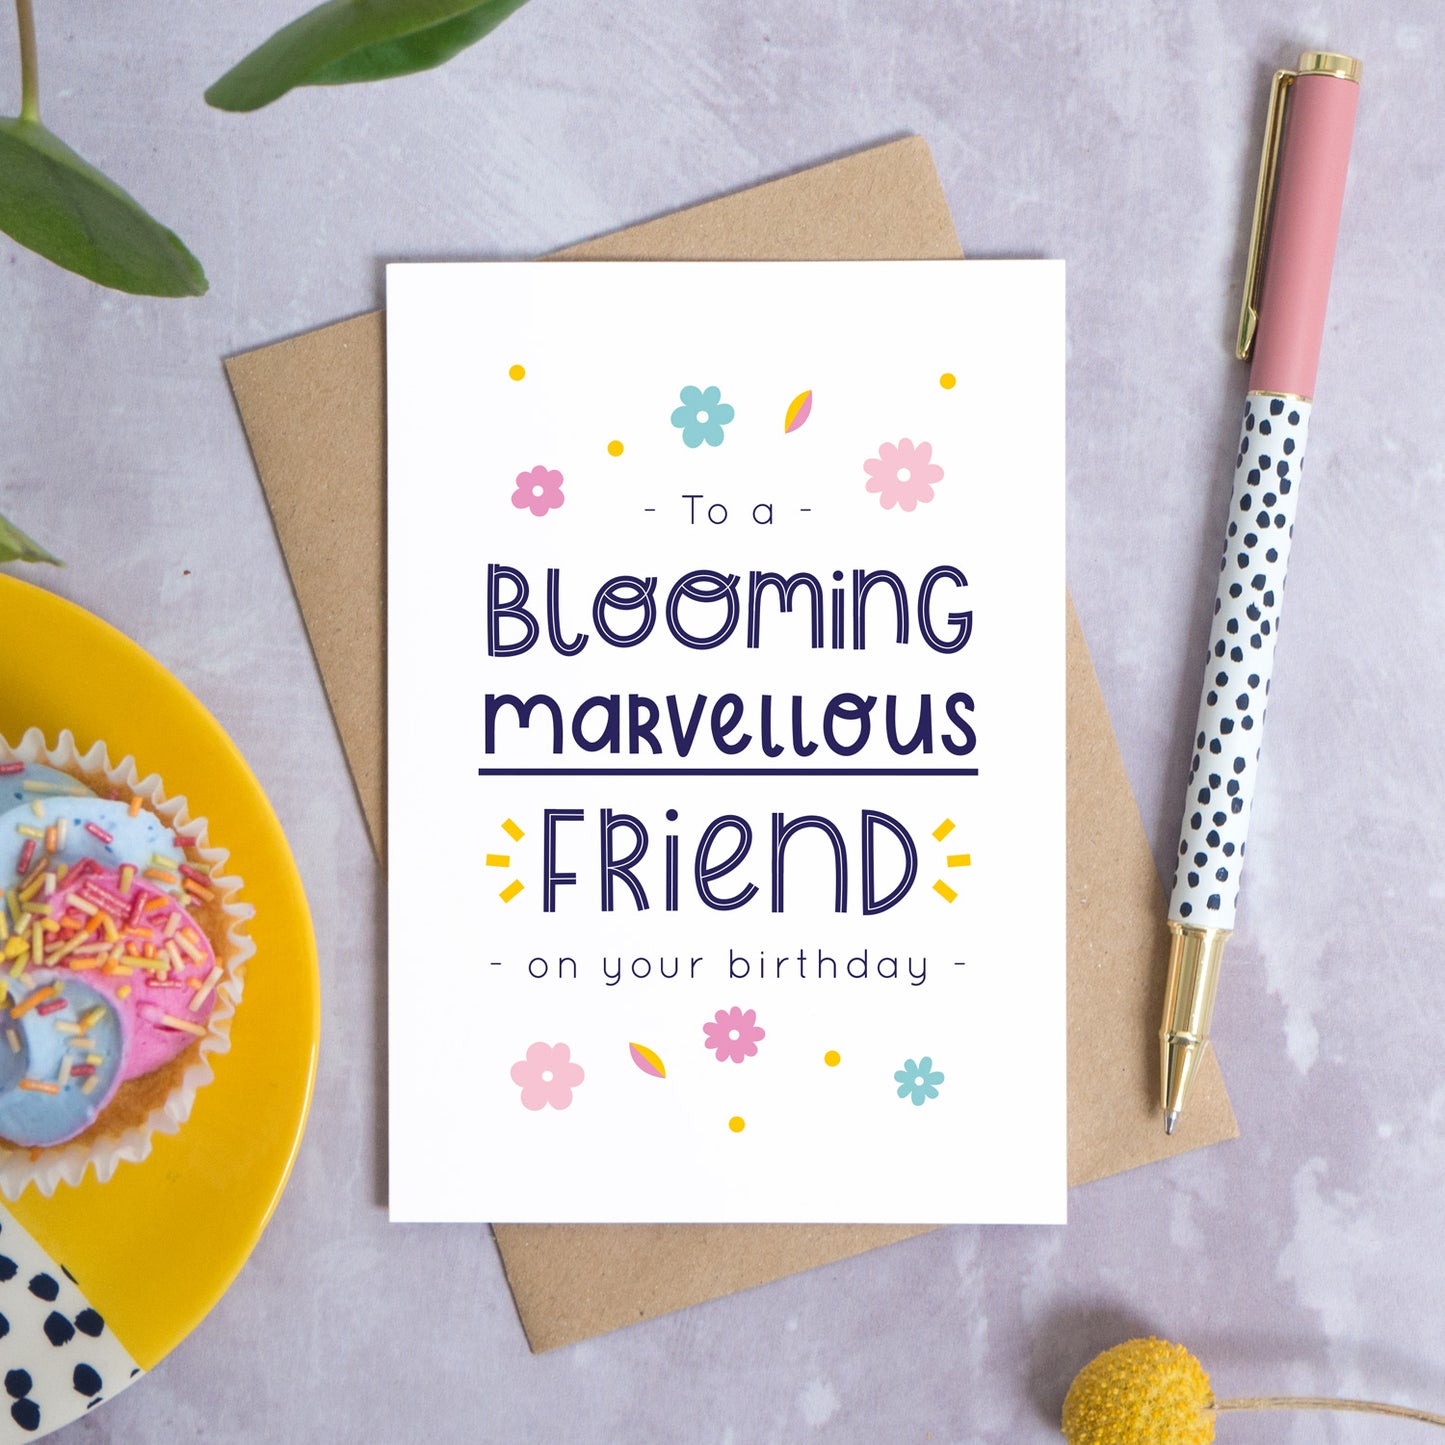 A blooming marvellous friend birthday card photographed on top of it’s kraft brown envelope set on a grey background. To the left is a yellow plate with a birthday cupcake and to the top is green foliage. To the right is a spotty pen for scale and a pop of a yellow flower in the bottom right.